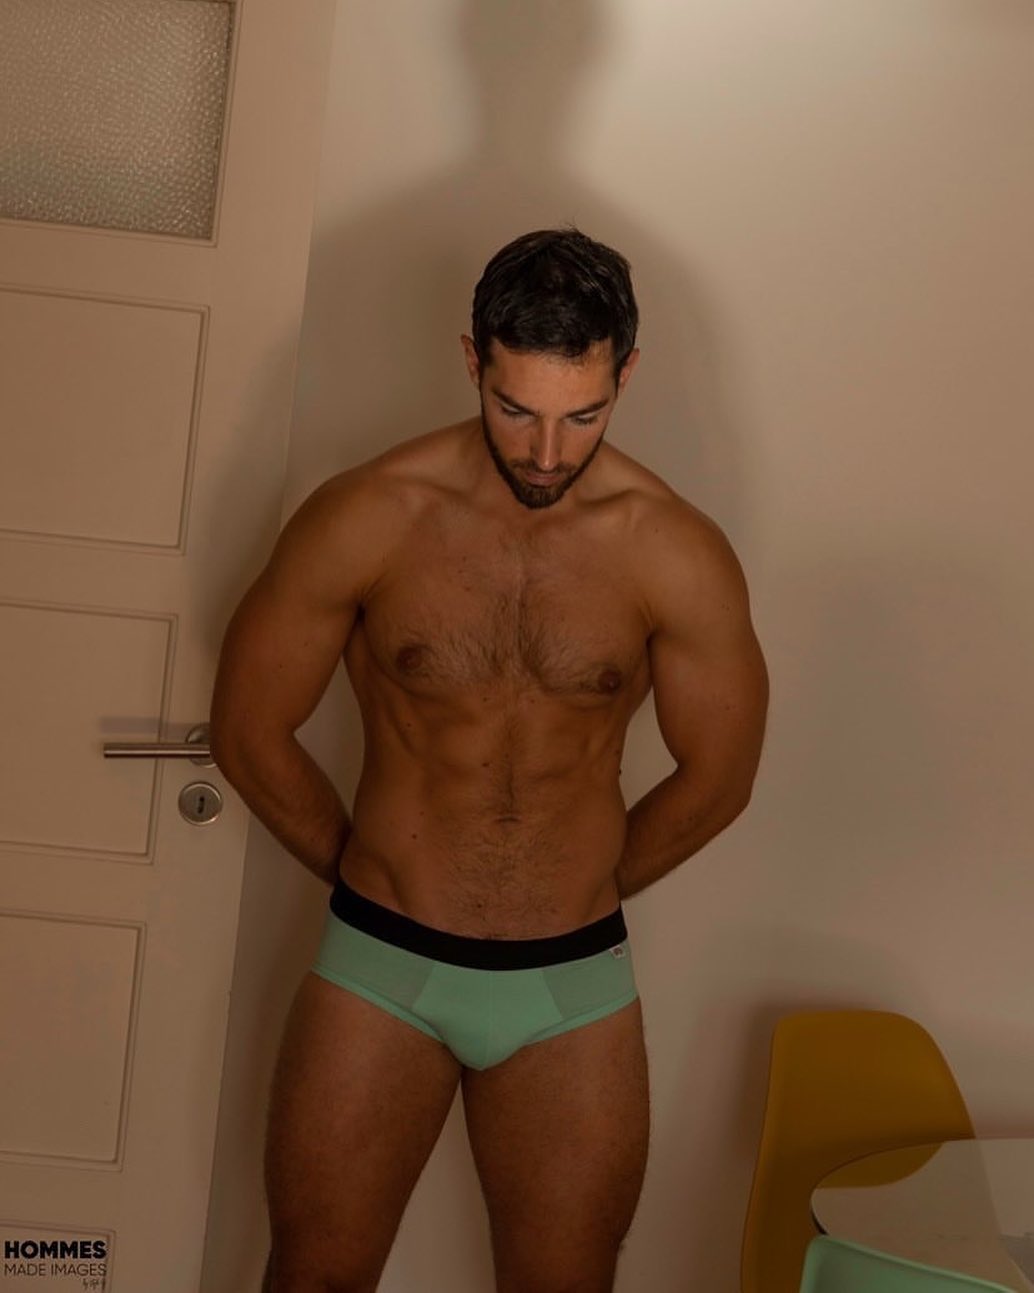 Model Jeremy gets photographed by Hommes Made Images in the Greendr Briefs of LeBeauTom. Check out the third part of the launch campaign of the French brand:
____
https://www.menandunderwear.com/2022/09/model-jeremy-by-hommes-made-images-lebeautom-briefs-part-three.html